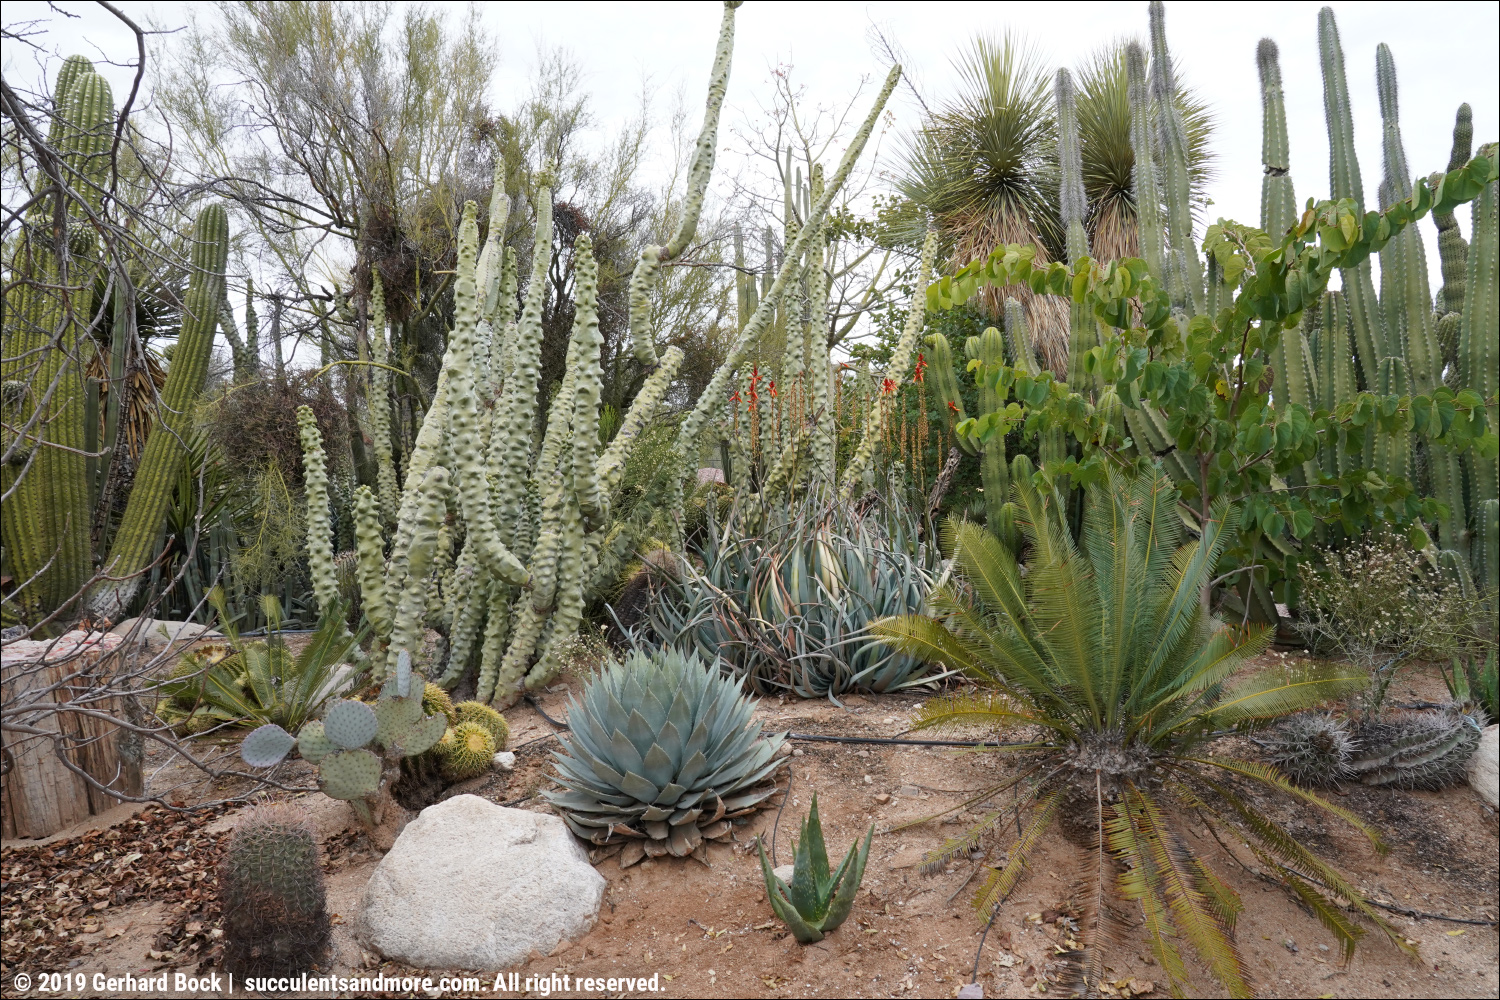 Bach's Cactus Nursery in Tucson on a chilly winter day